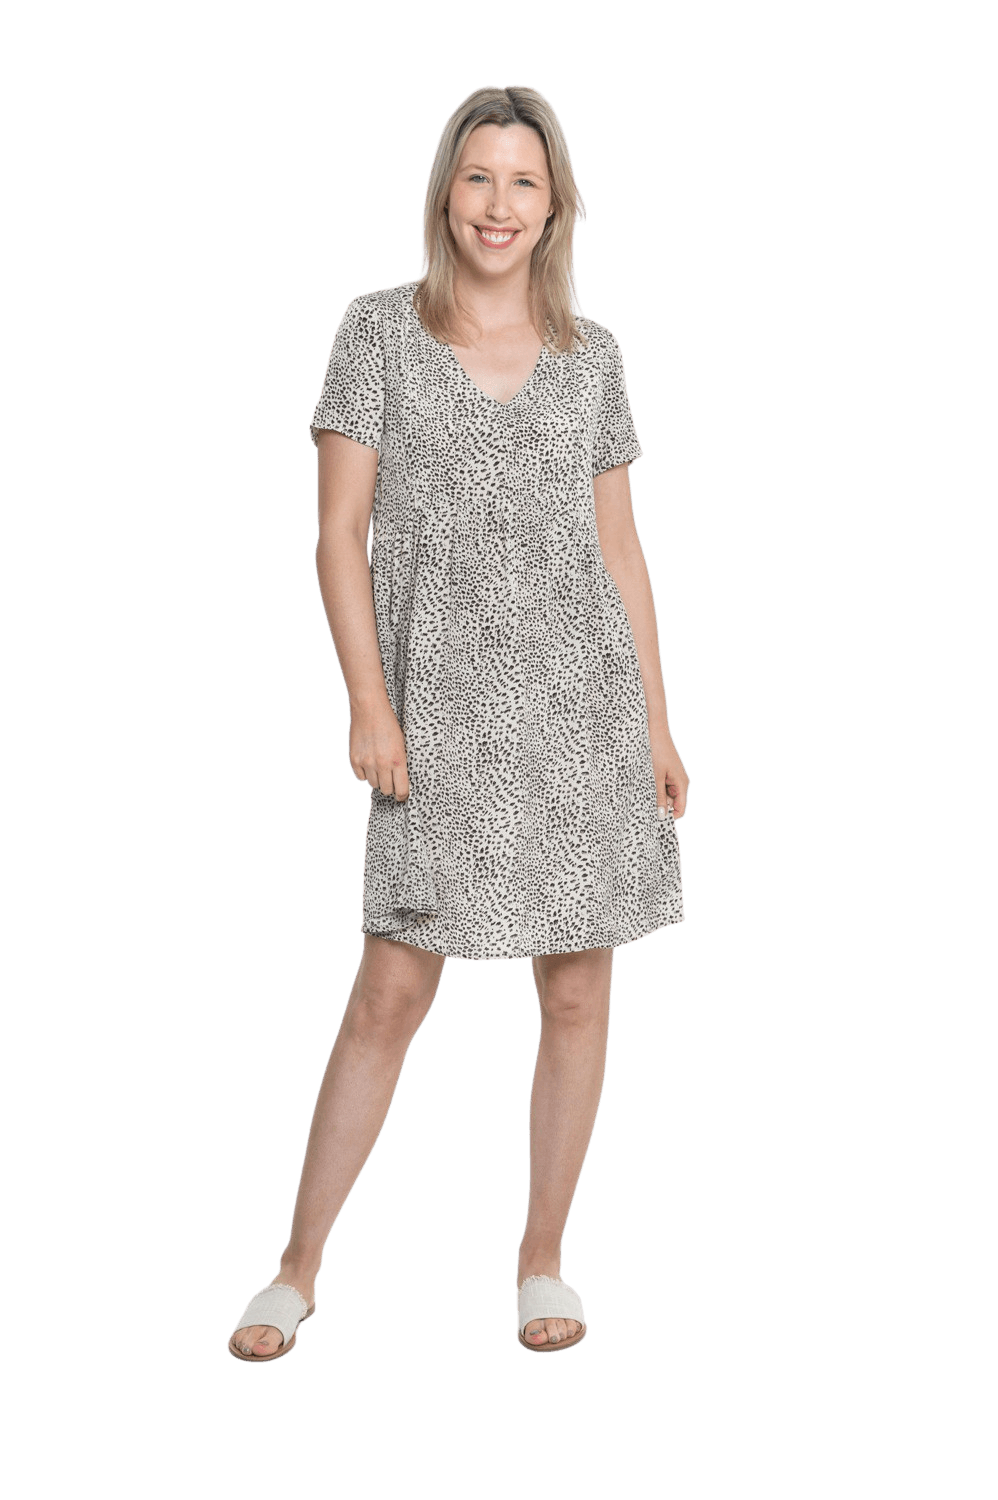 Petite model facing camera wearing knee length, leopard print dress, featuring soft v-neck. Avery available in sizes 6-26